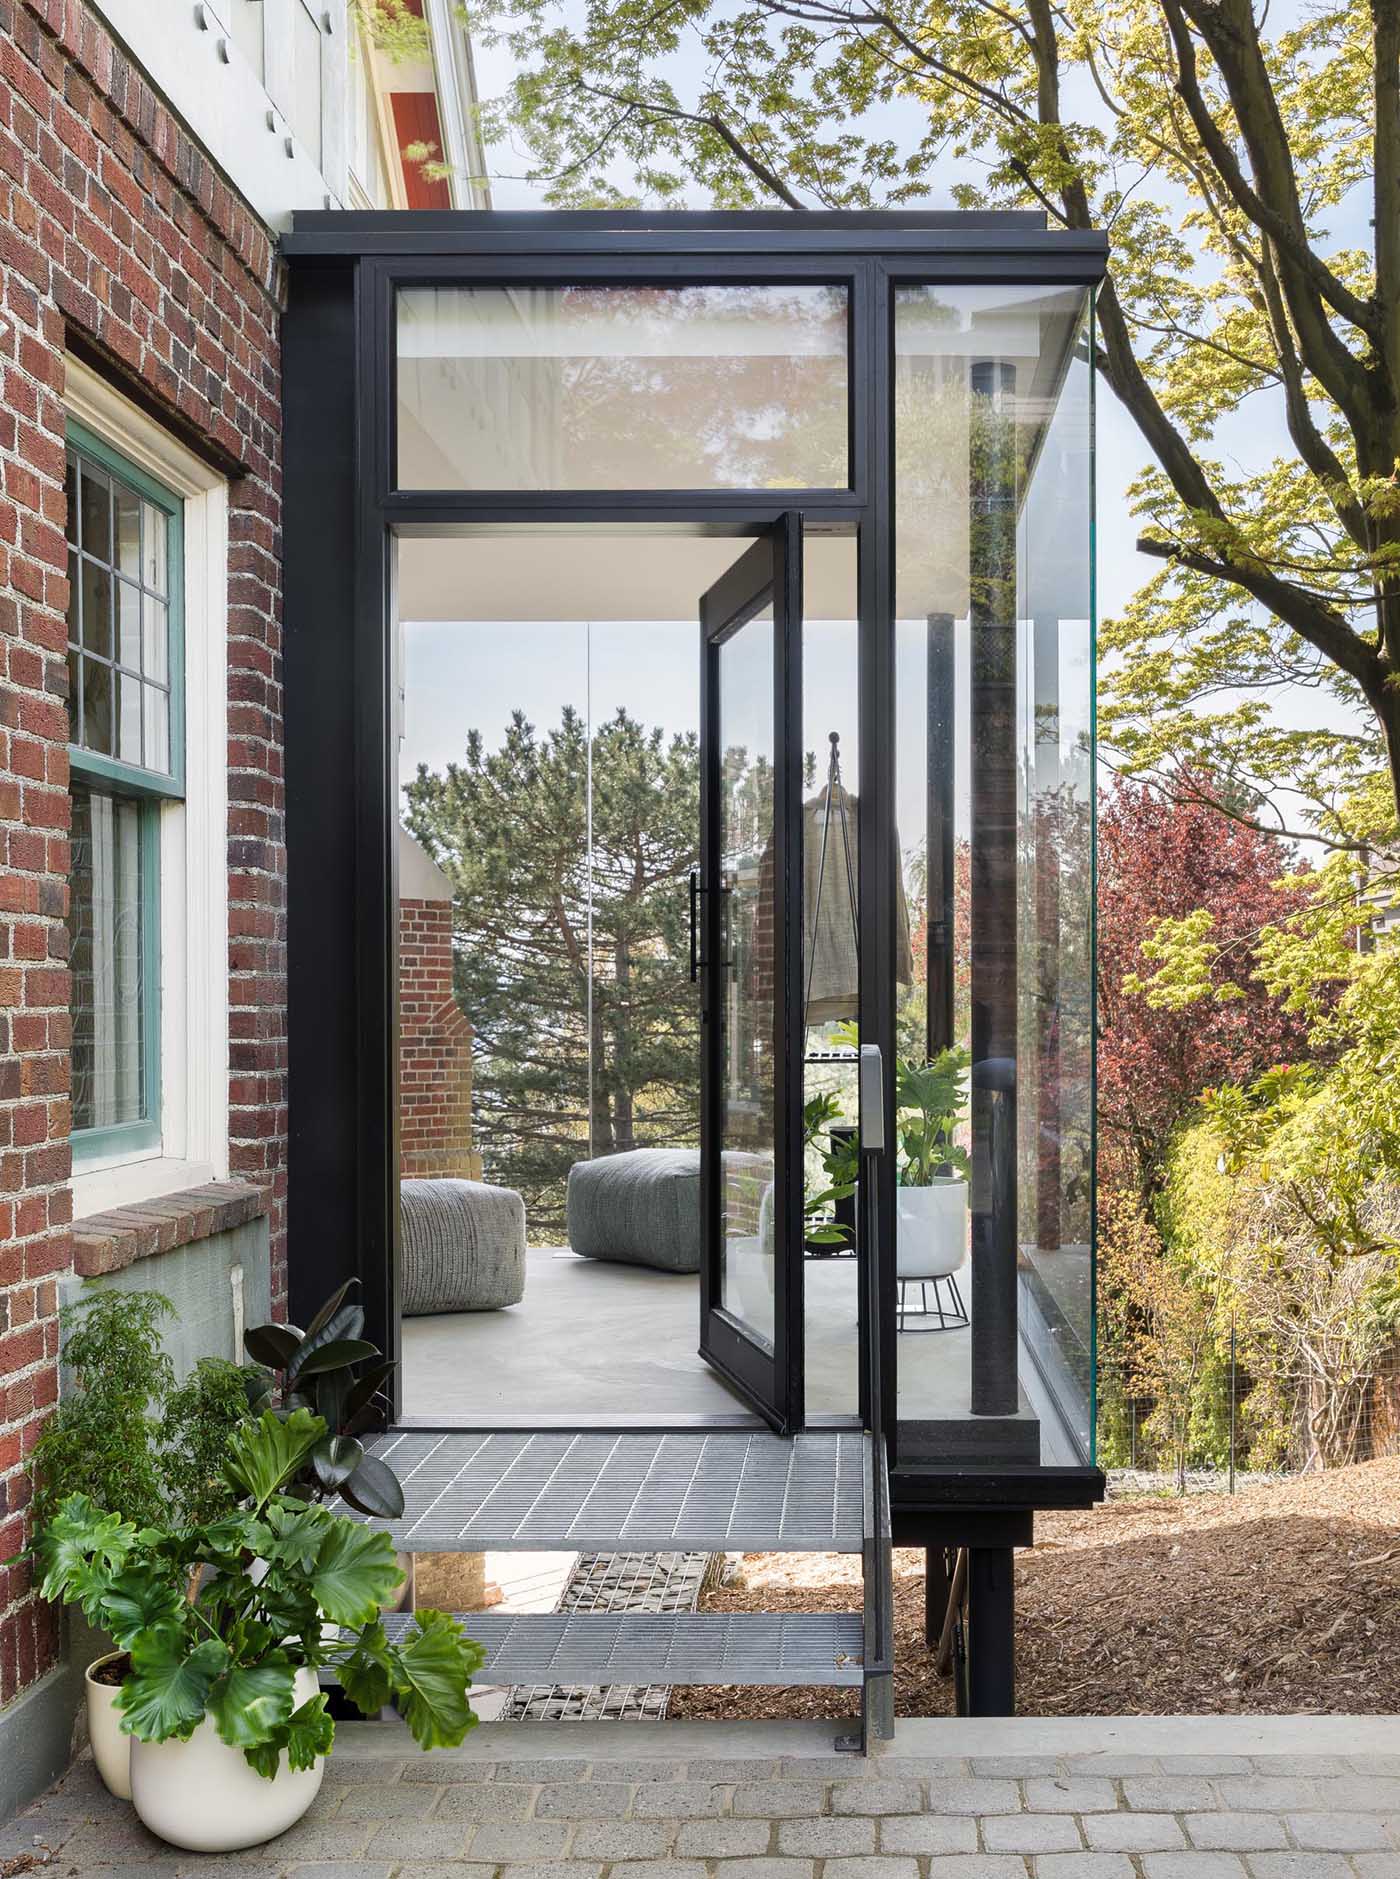 This updated light filled home has a new glass enclosed entryway with black frames, creating a contemporary addition to the brick and wood house.